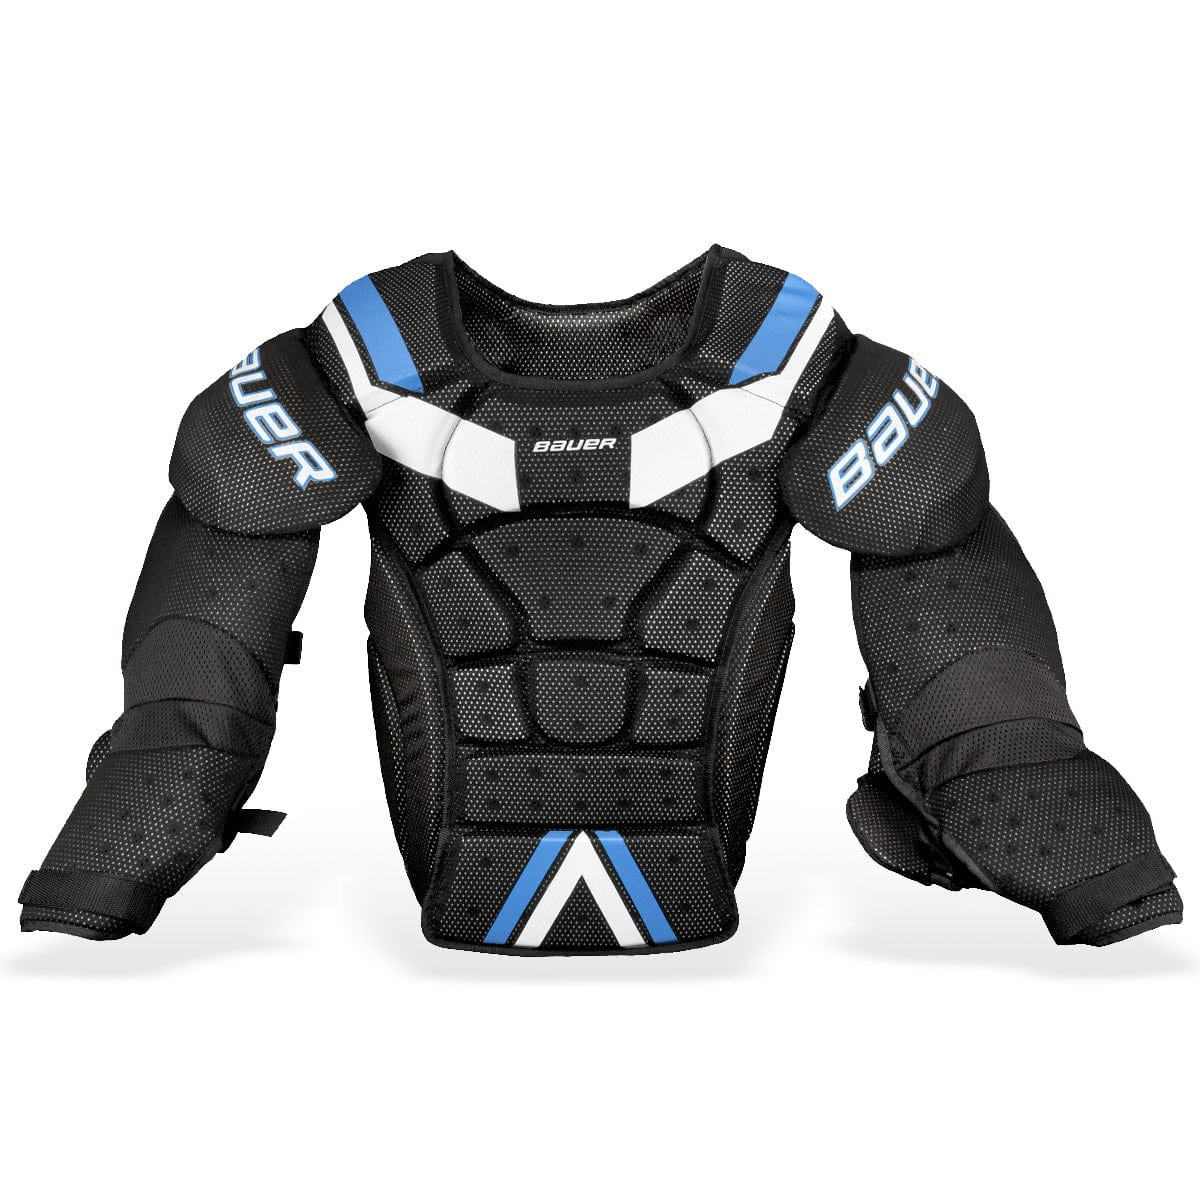 Bauer Senior Street Hockey Chest Protector (2015) - The Hockey Shop Source For Sports